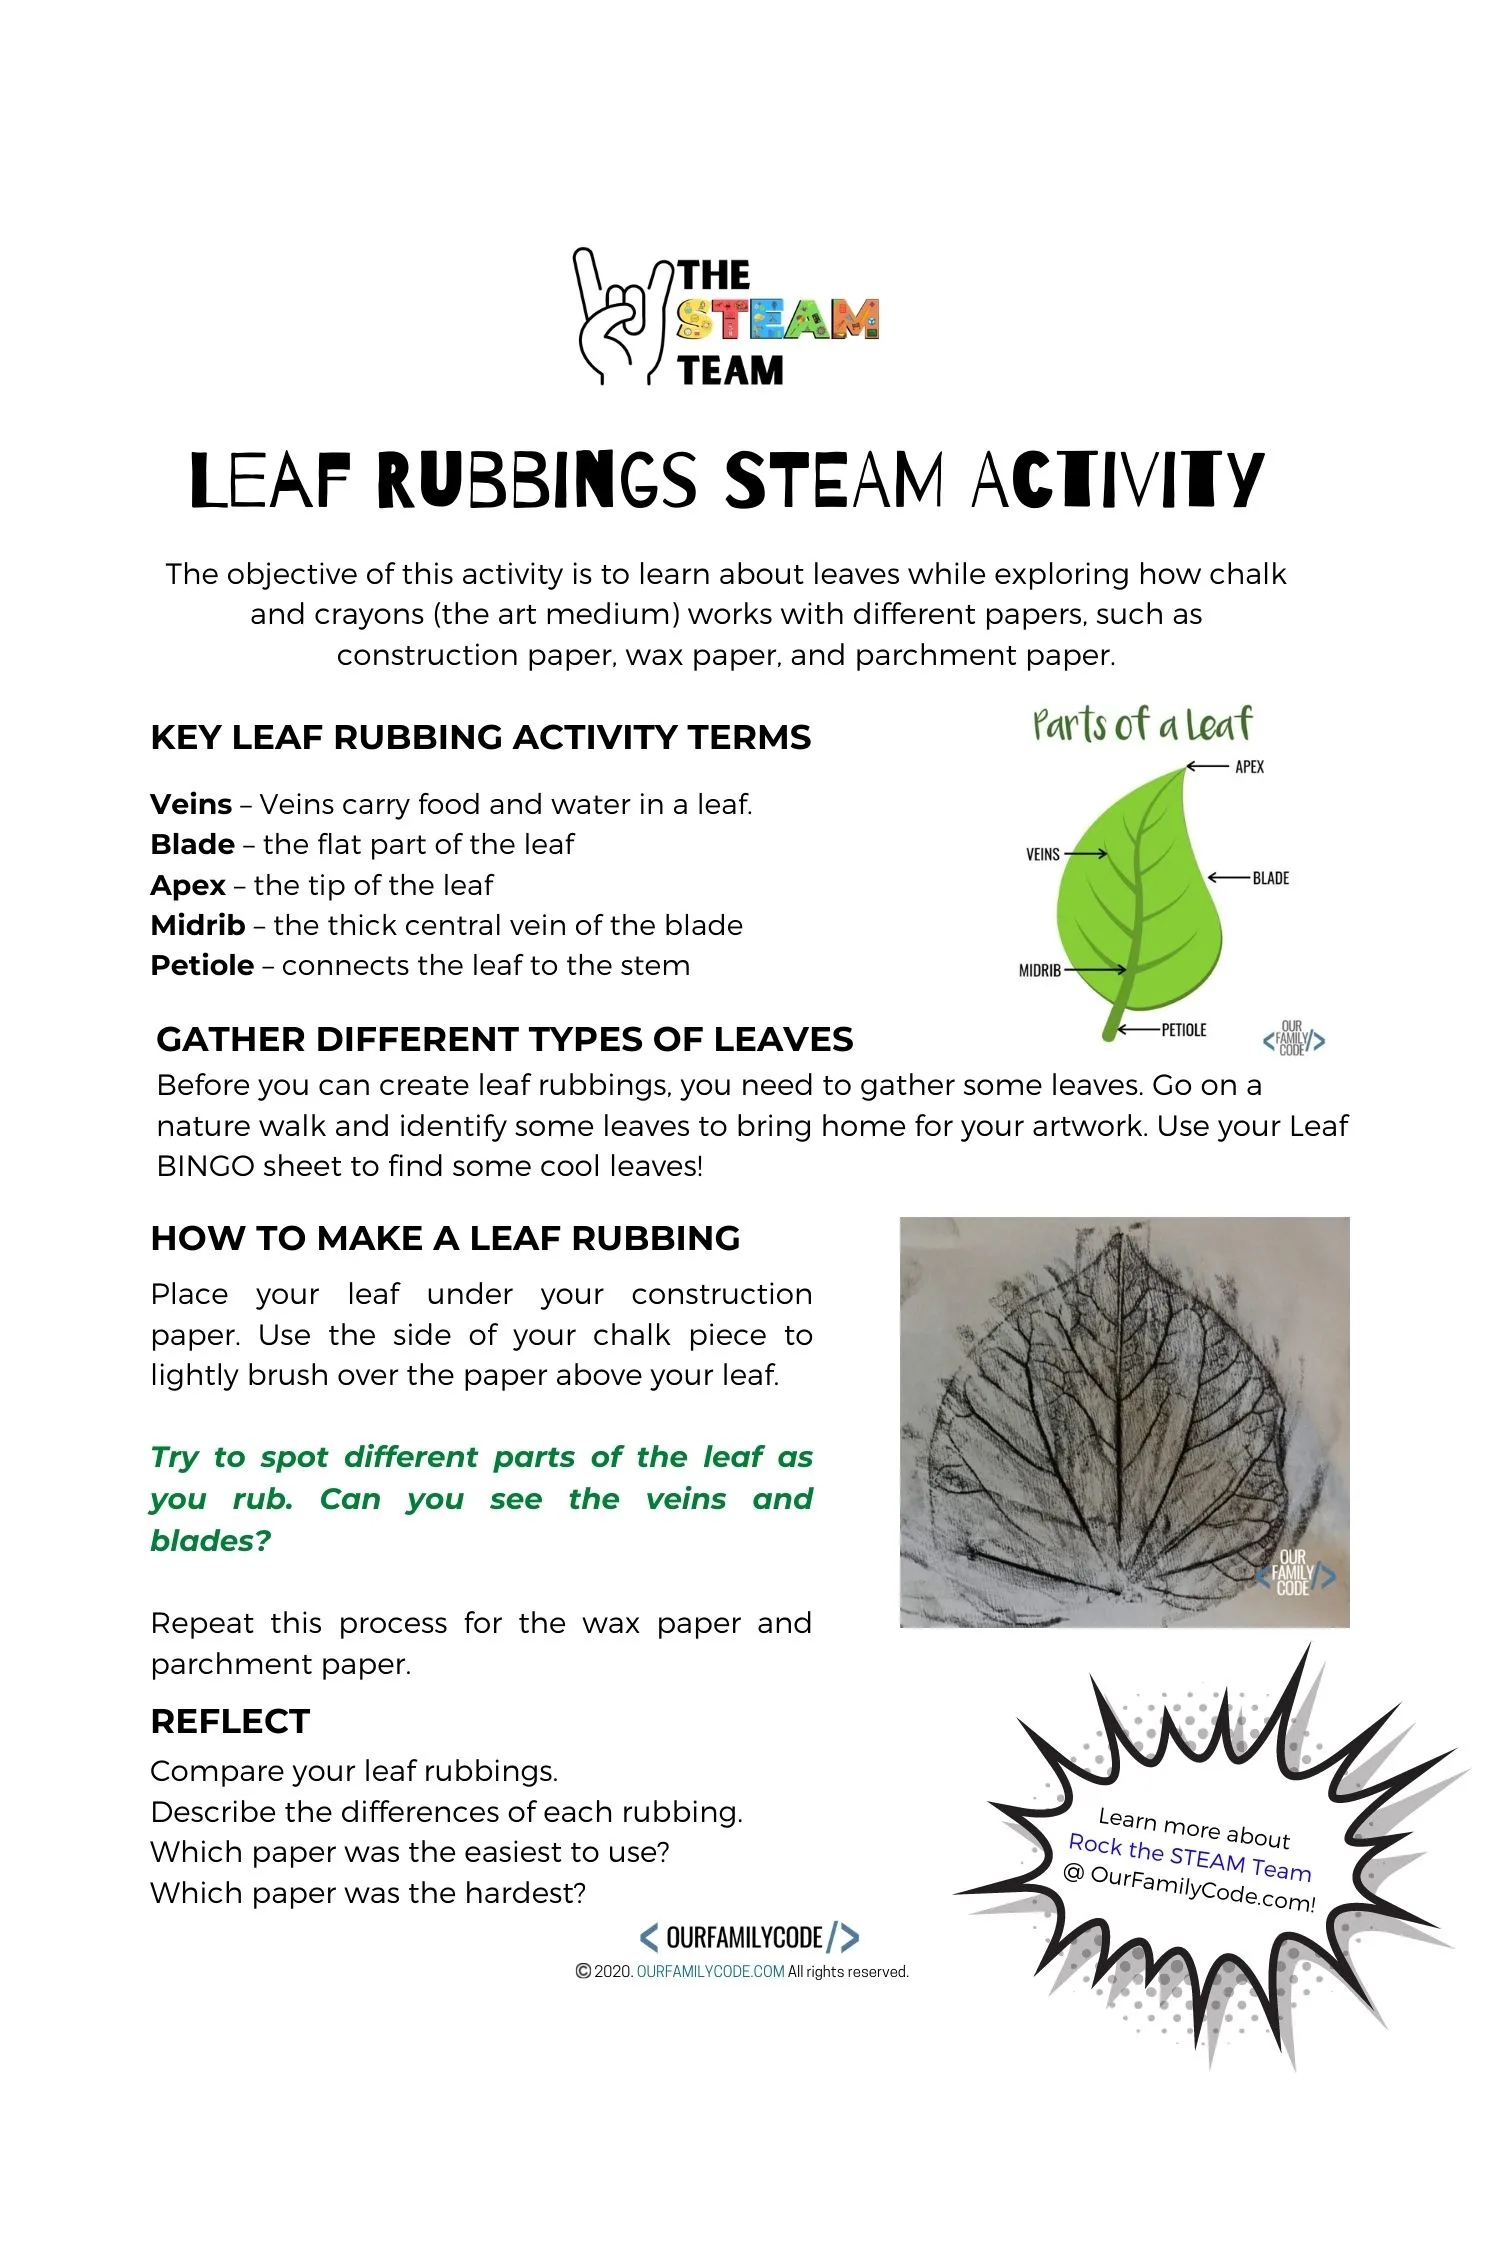 A picture of a printable leaf rubbing remote learning steam kit activity number 1.